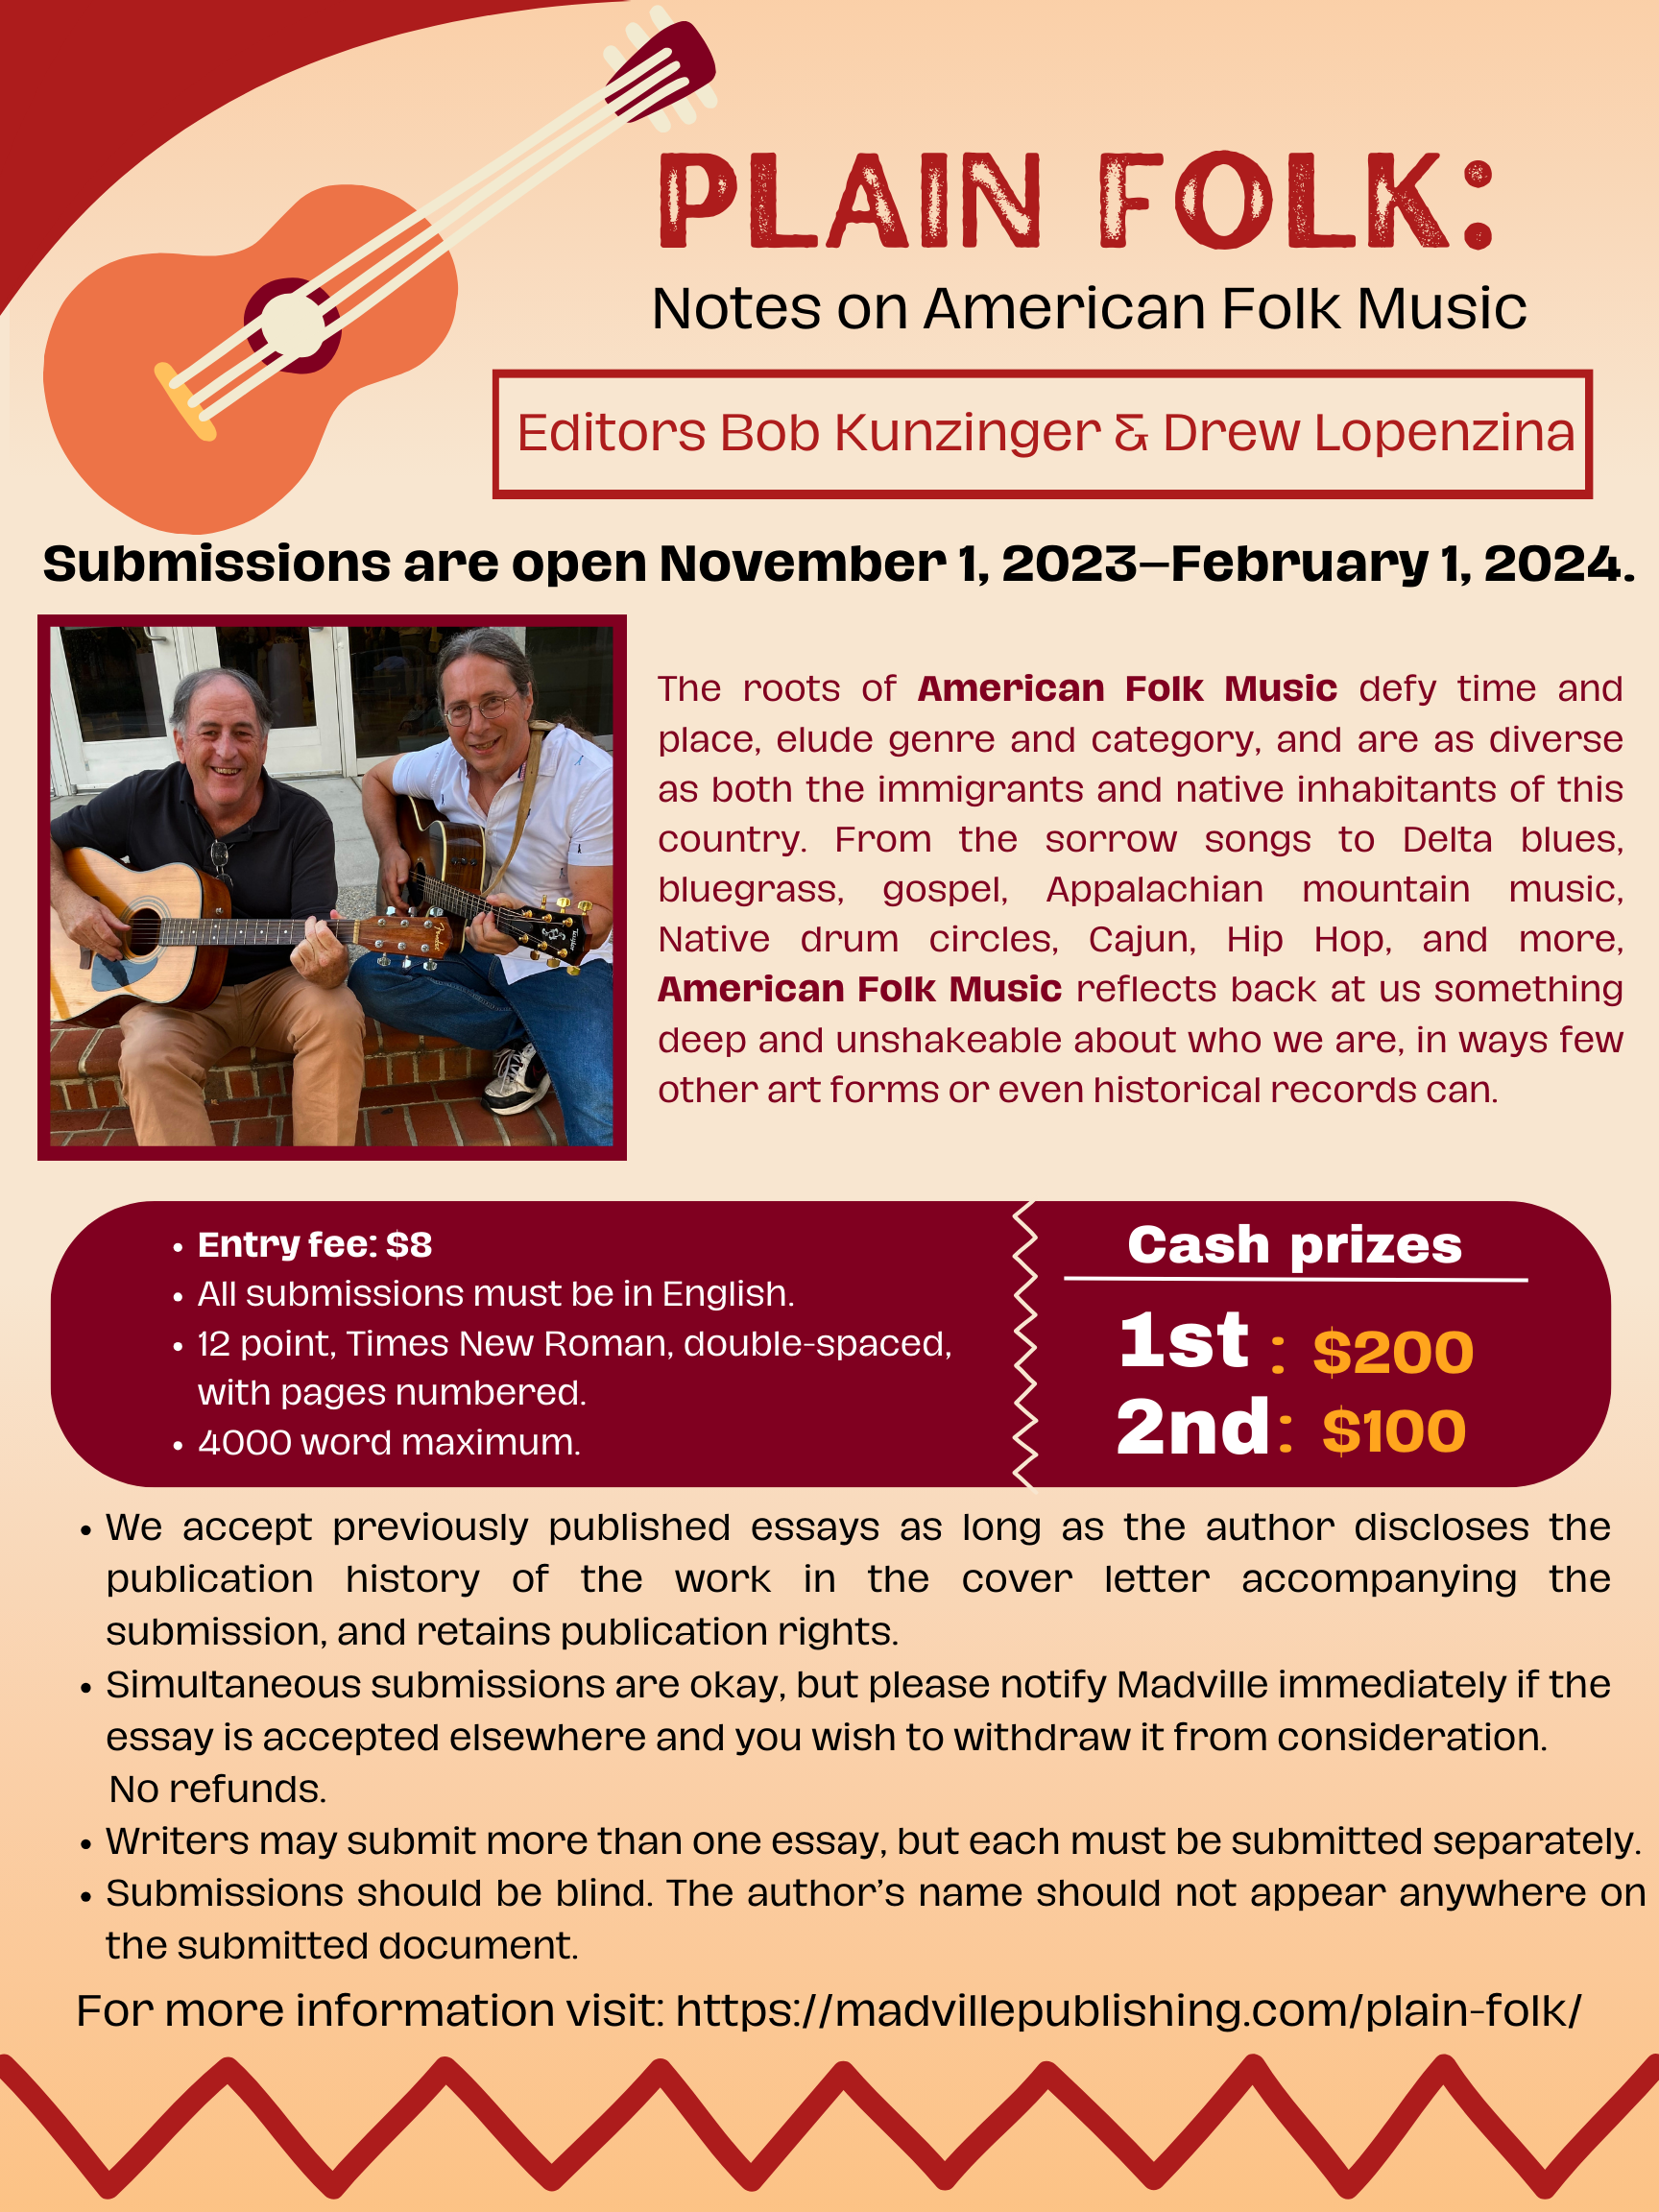 We call for essays that carry forward this notion of American folk music--what it means to us as individuals, as Americans, and how it continues to give shape, expression, and meaning to our lives.